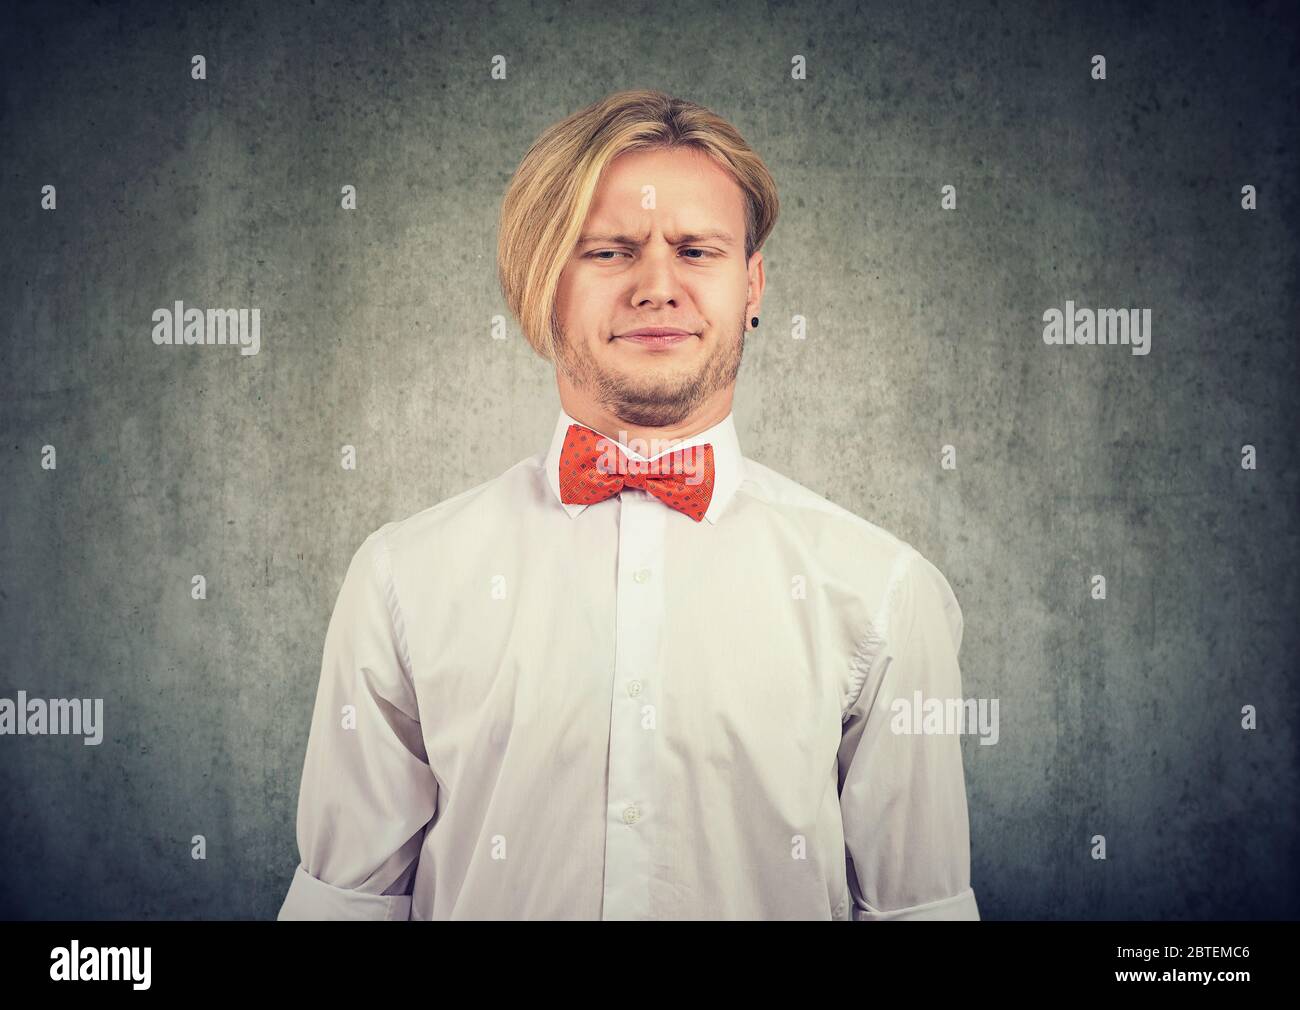 Man feeling annoyed grimacing with disgust his face isolated on grey background. Stock Photo